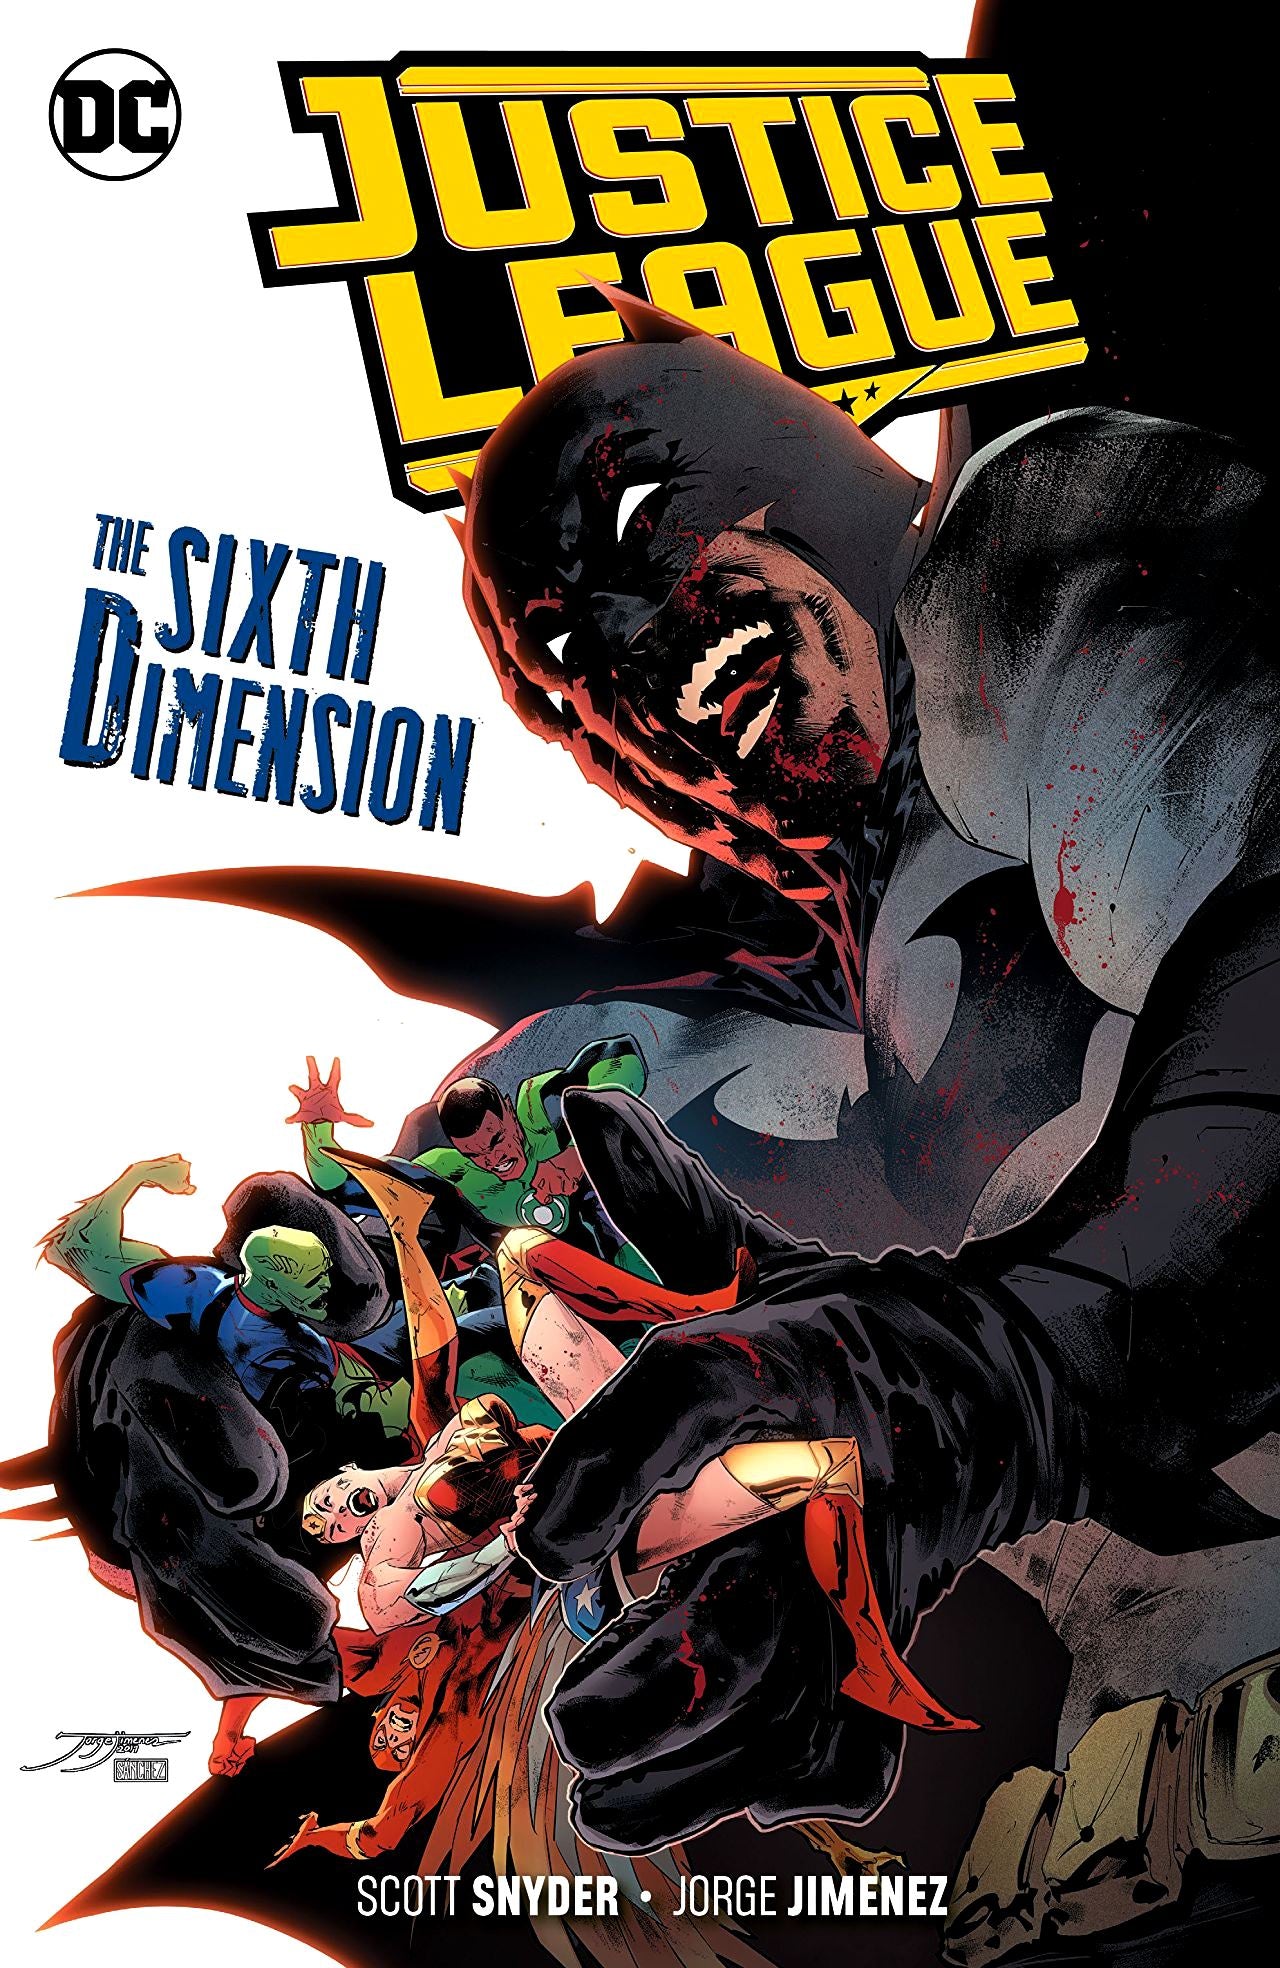 Justice League (2018) Volume 4: The Sixth Dimension